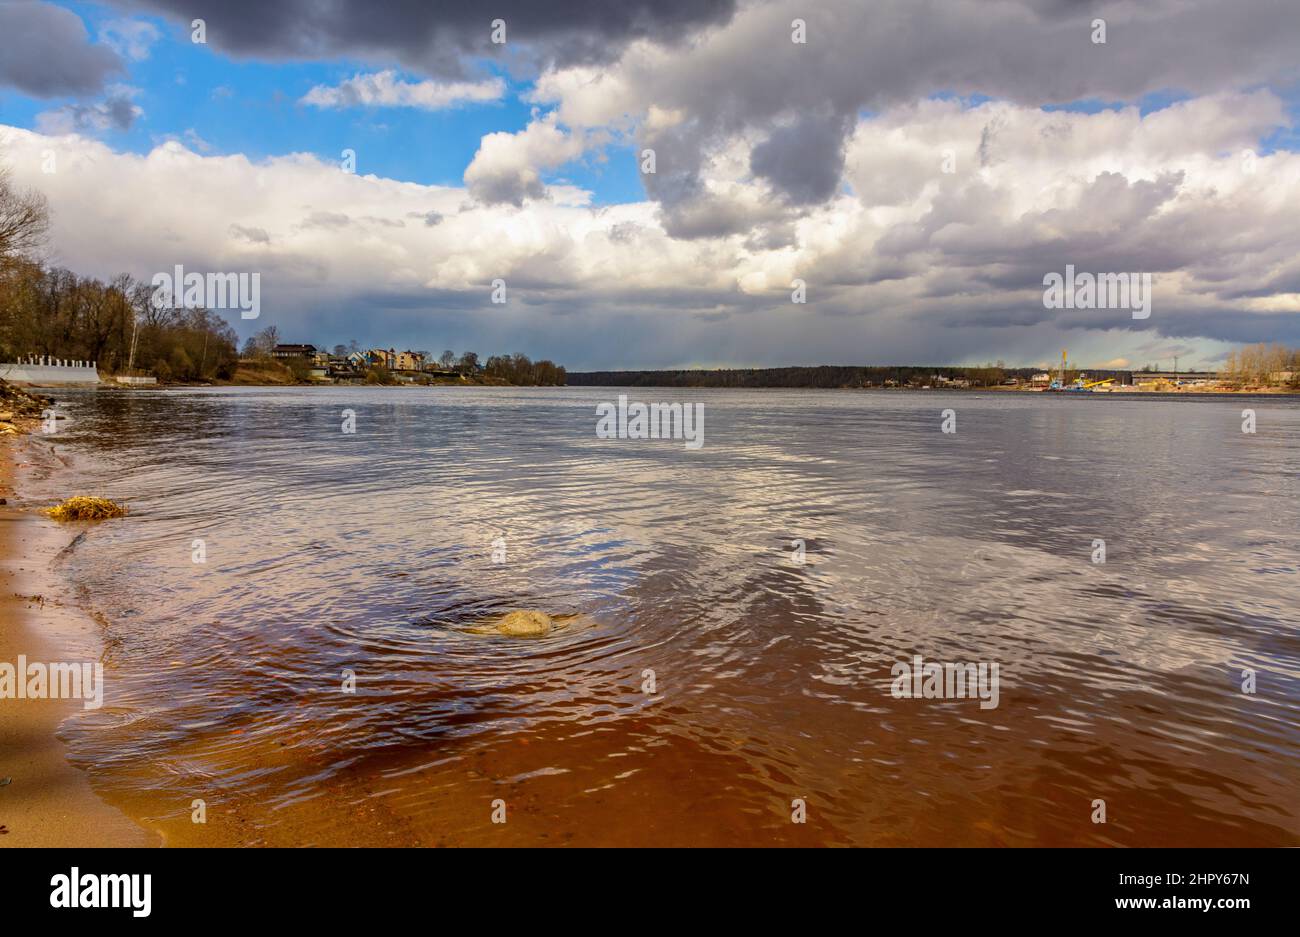 The confluence of river Izhora into river Neva. The historic site of the battle in 1240. Stock Photo